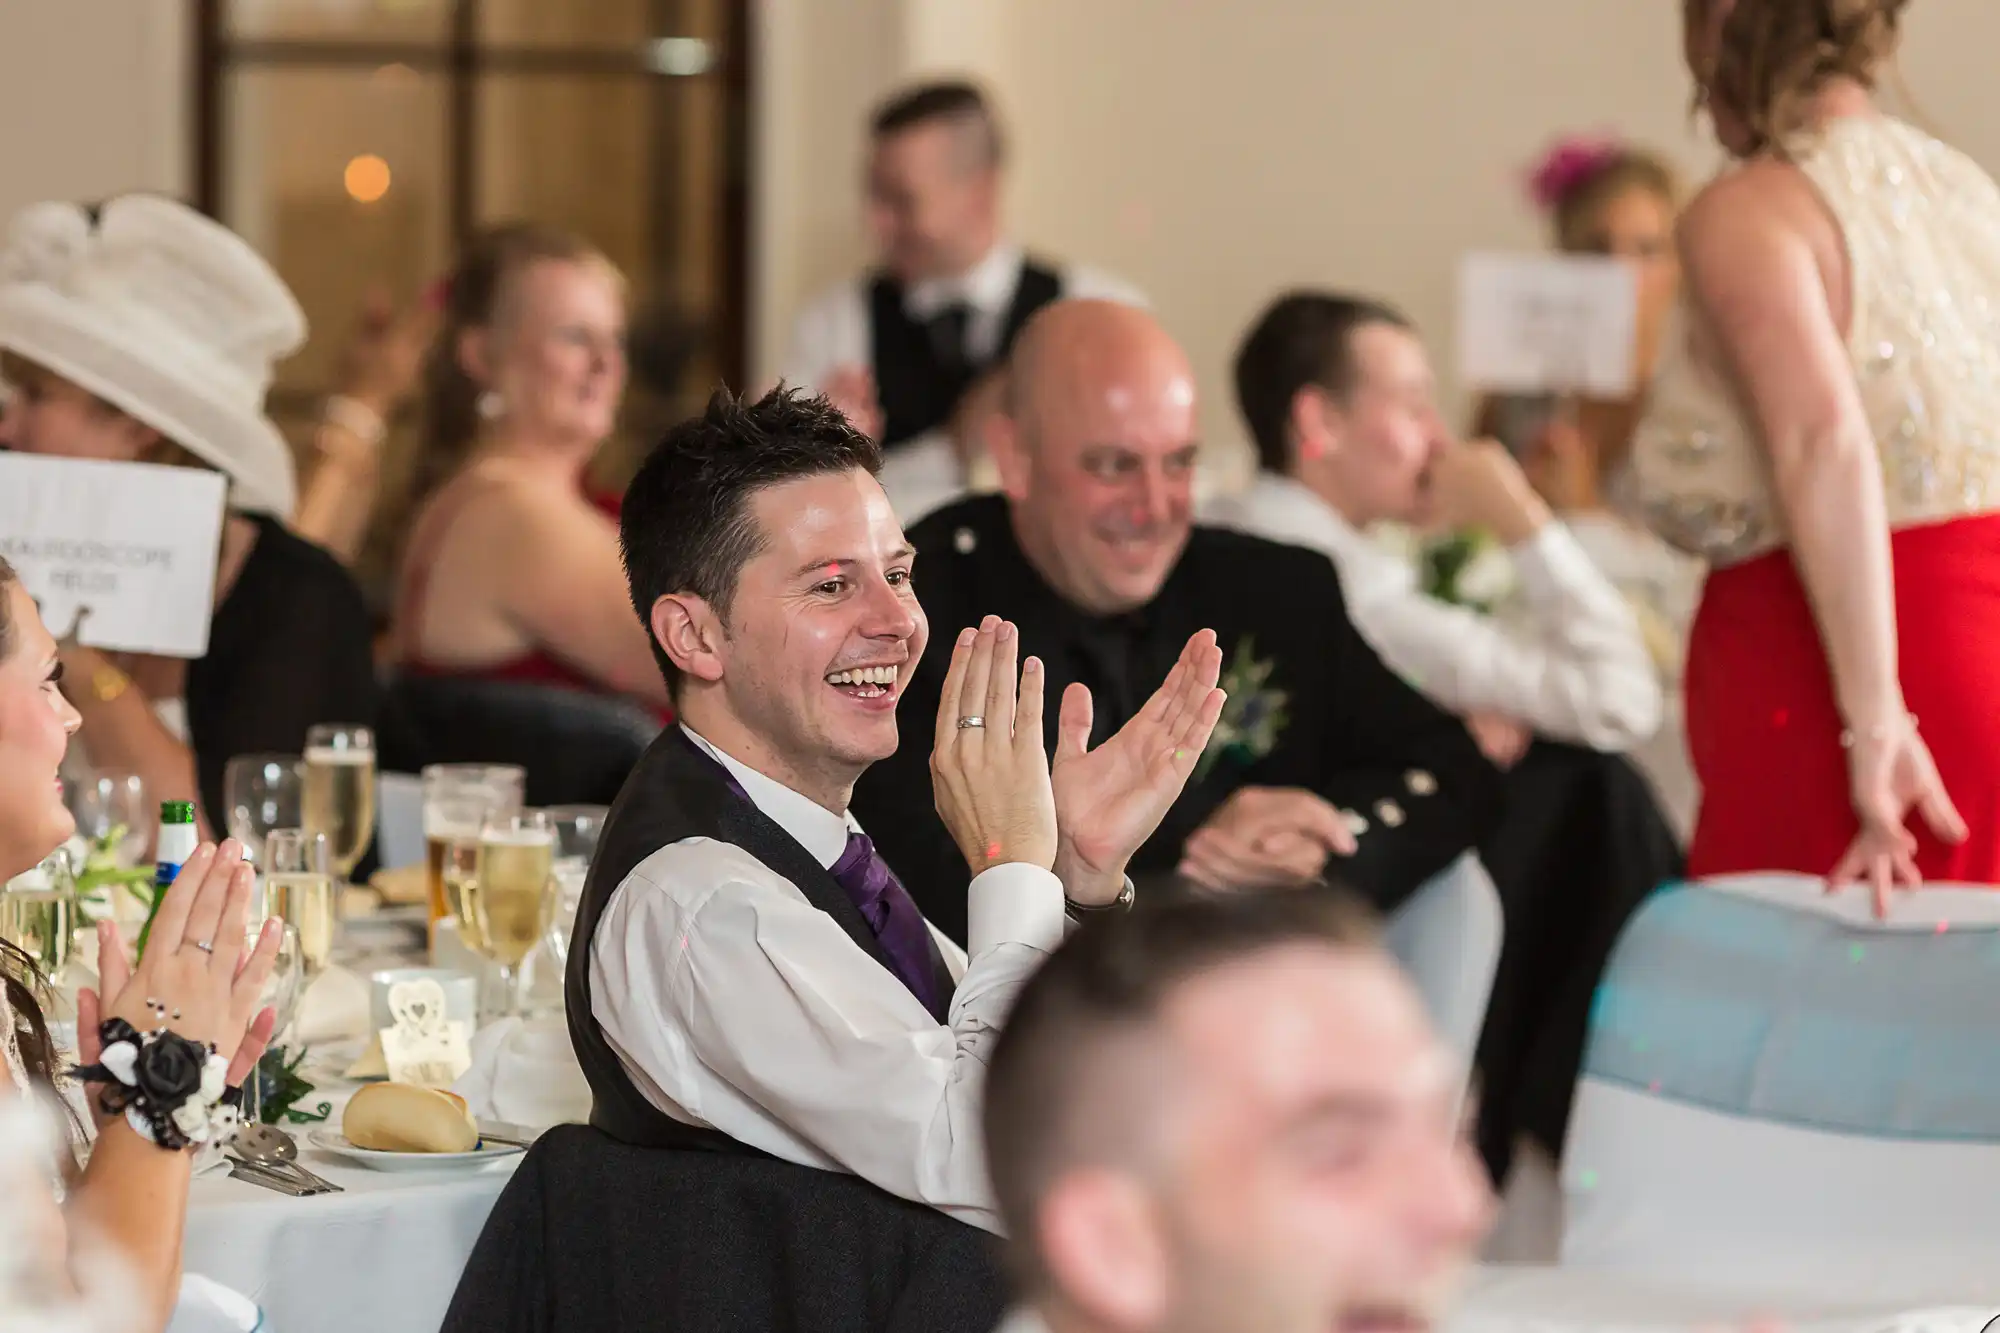 A man in a formal suit clapping and smiling at a wedding reception, surrounded by other guests at decorated tables.